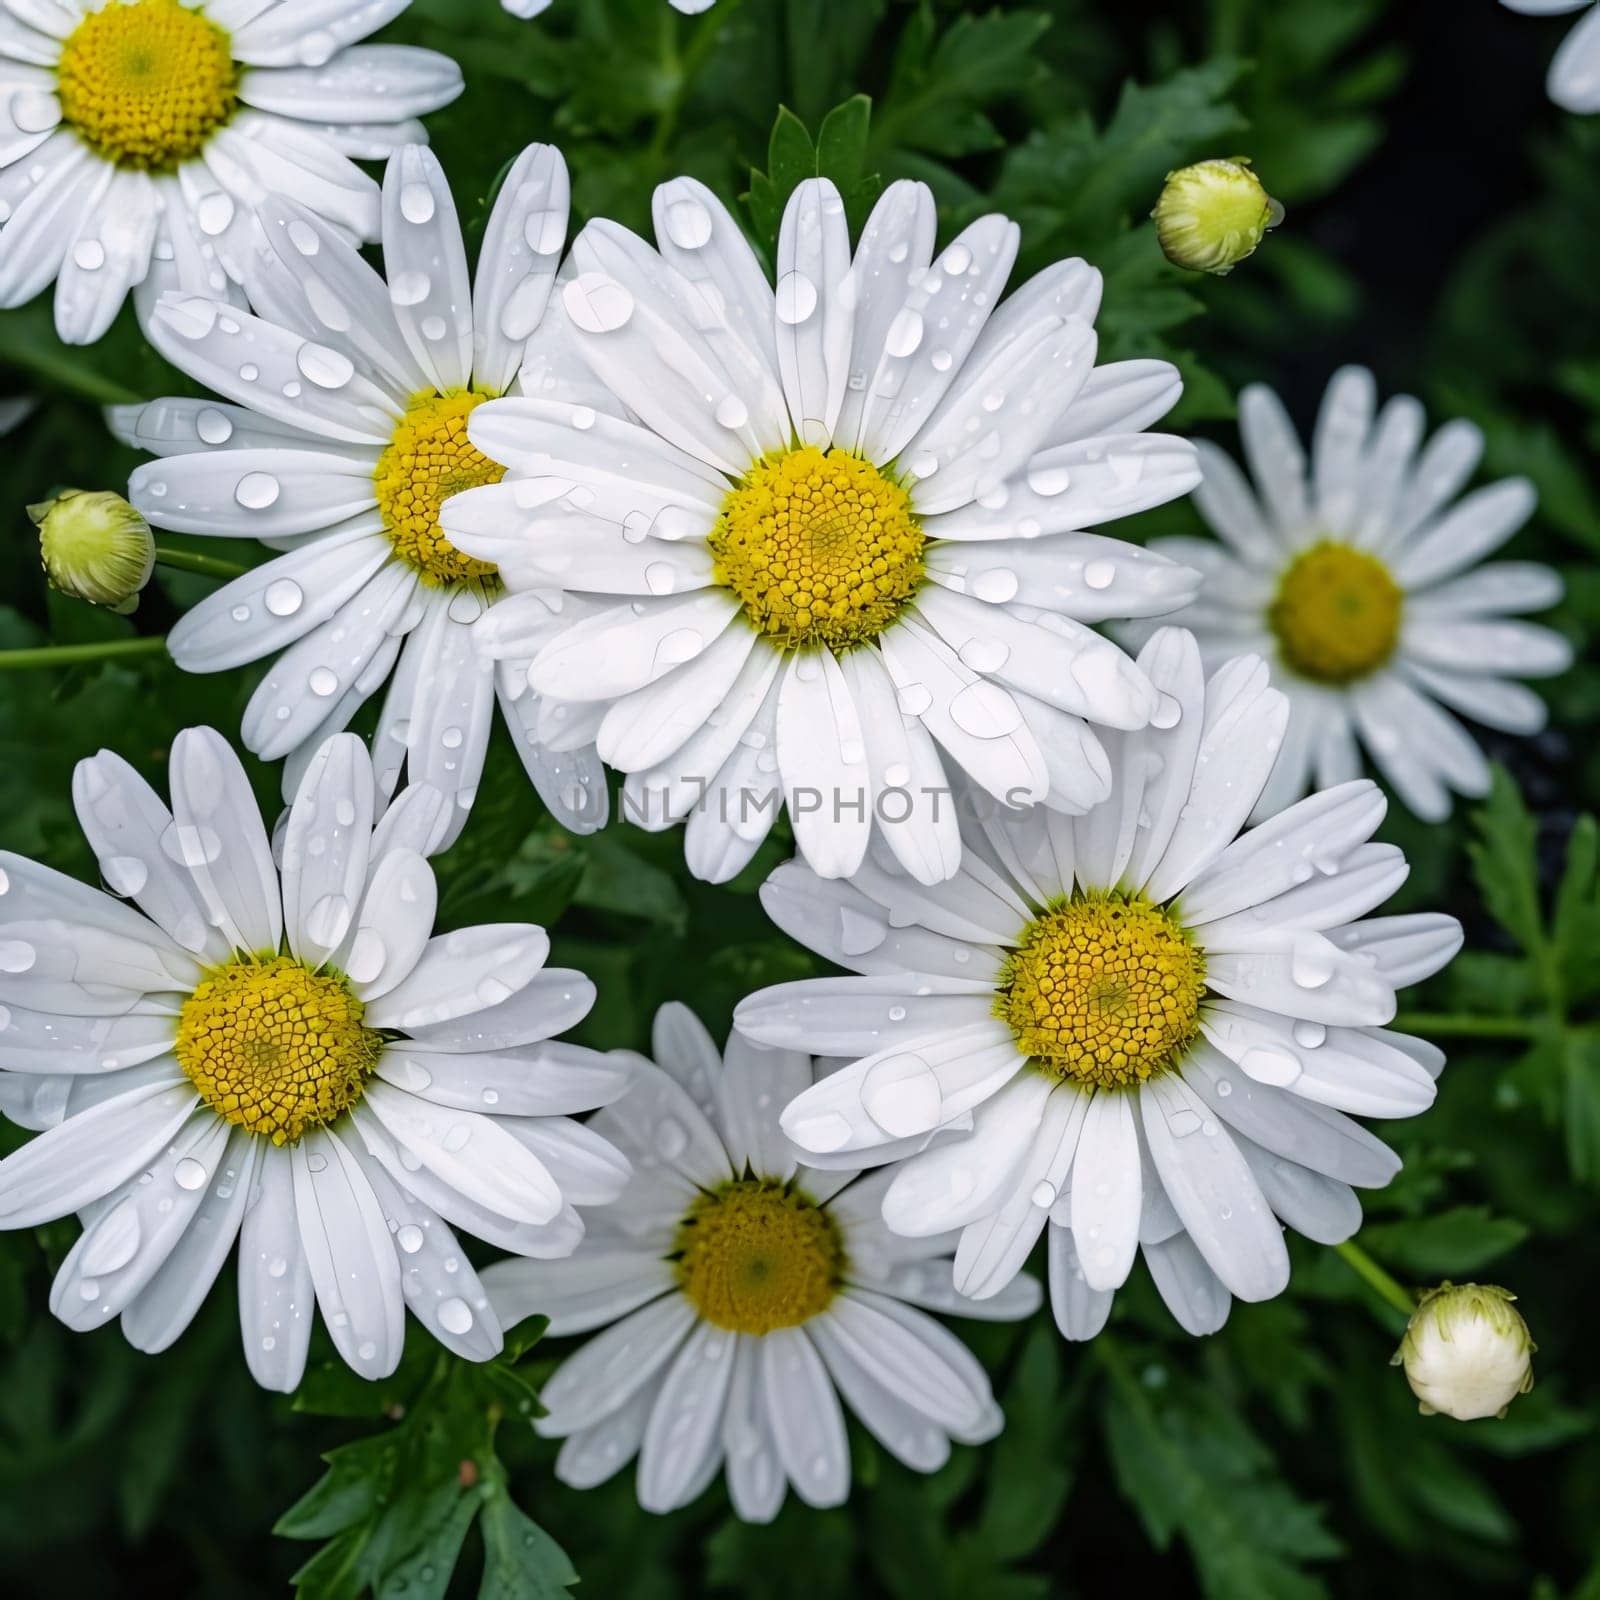 White daisies with green leaves in a field, close-up view. Drops of dew, rain, water on the petals. Flowering flowers, a symbol of spring, new life. A joyful time of nature waking up to life.